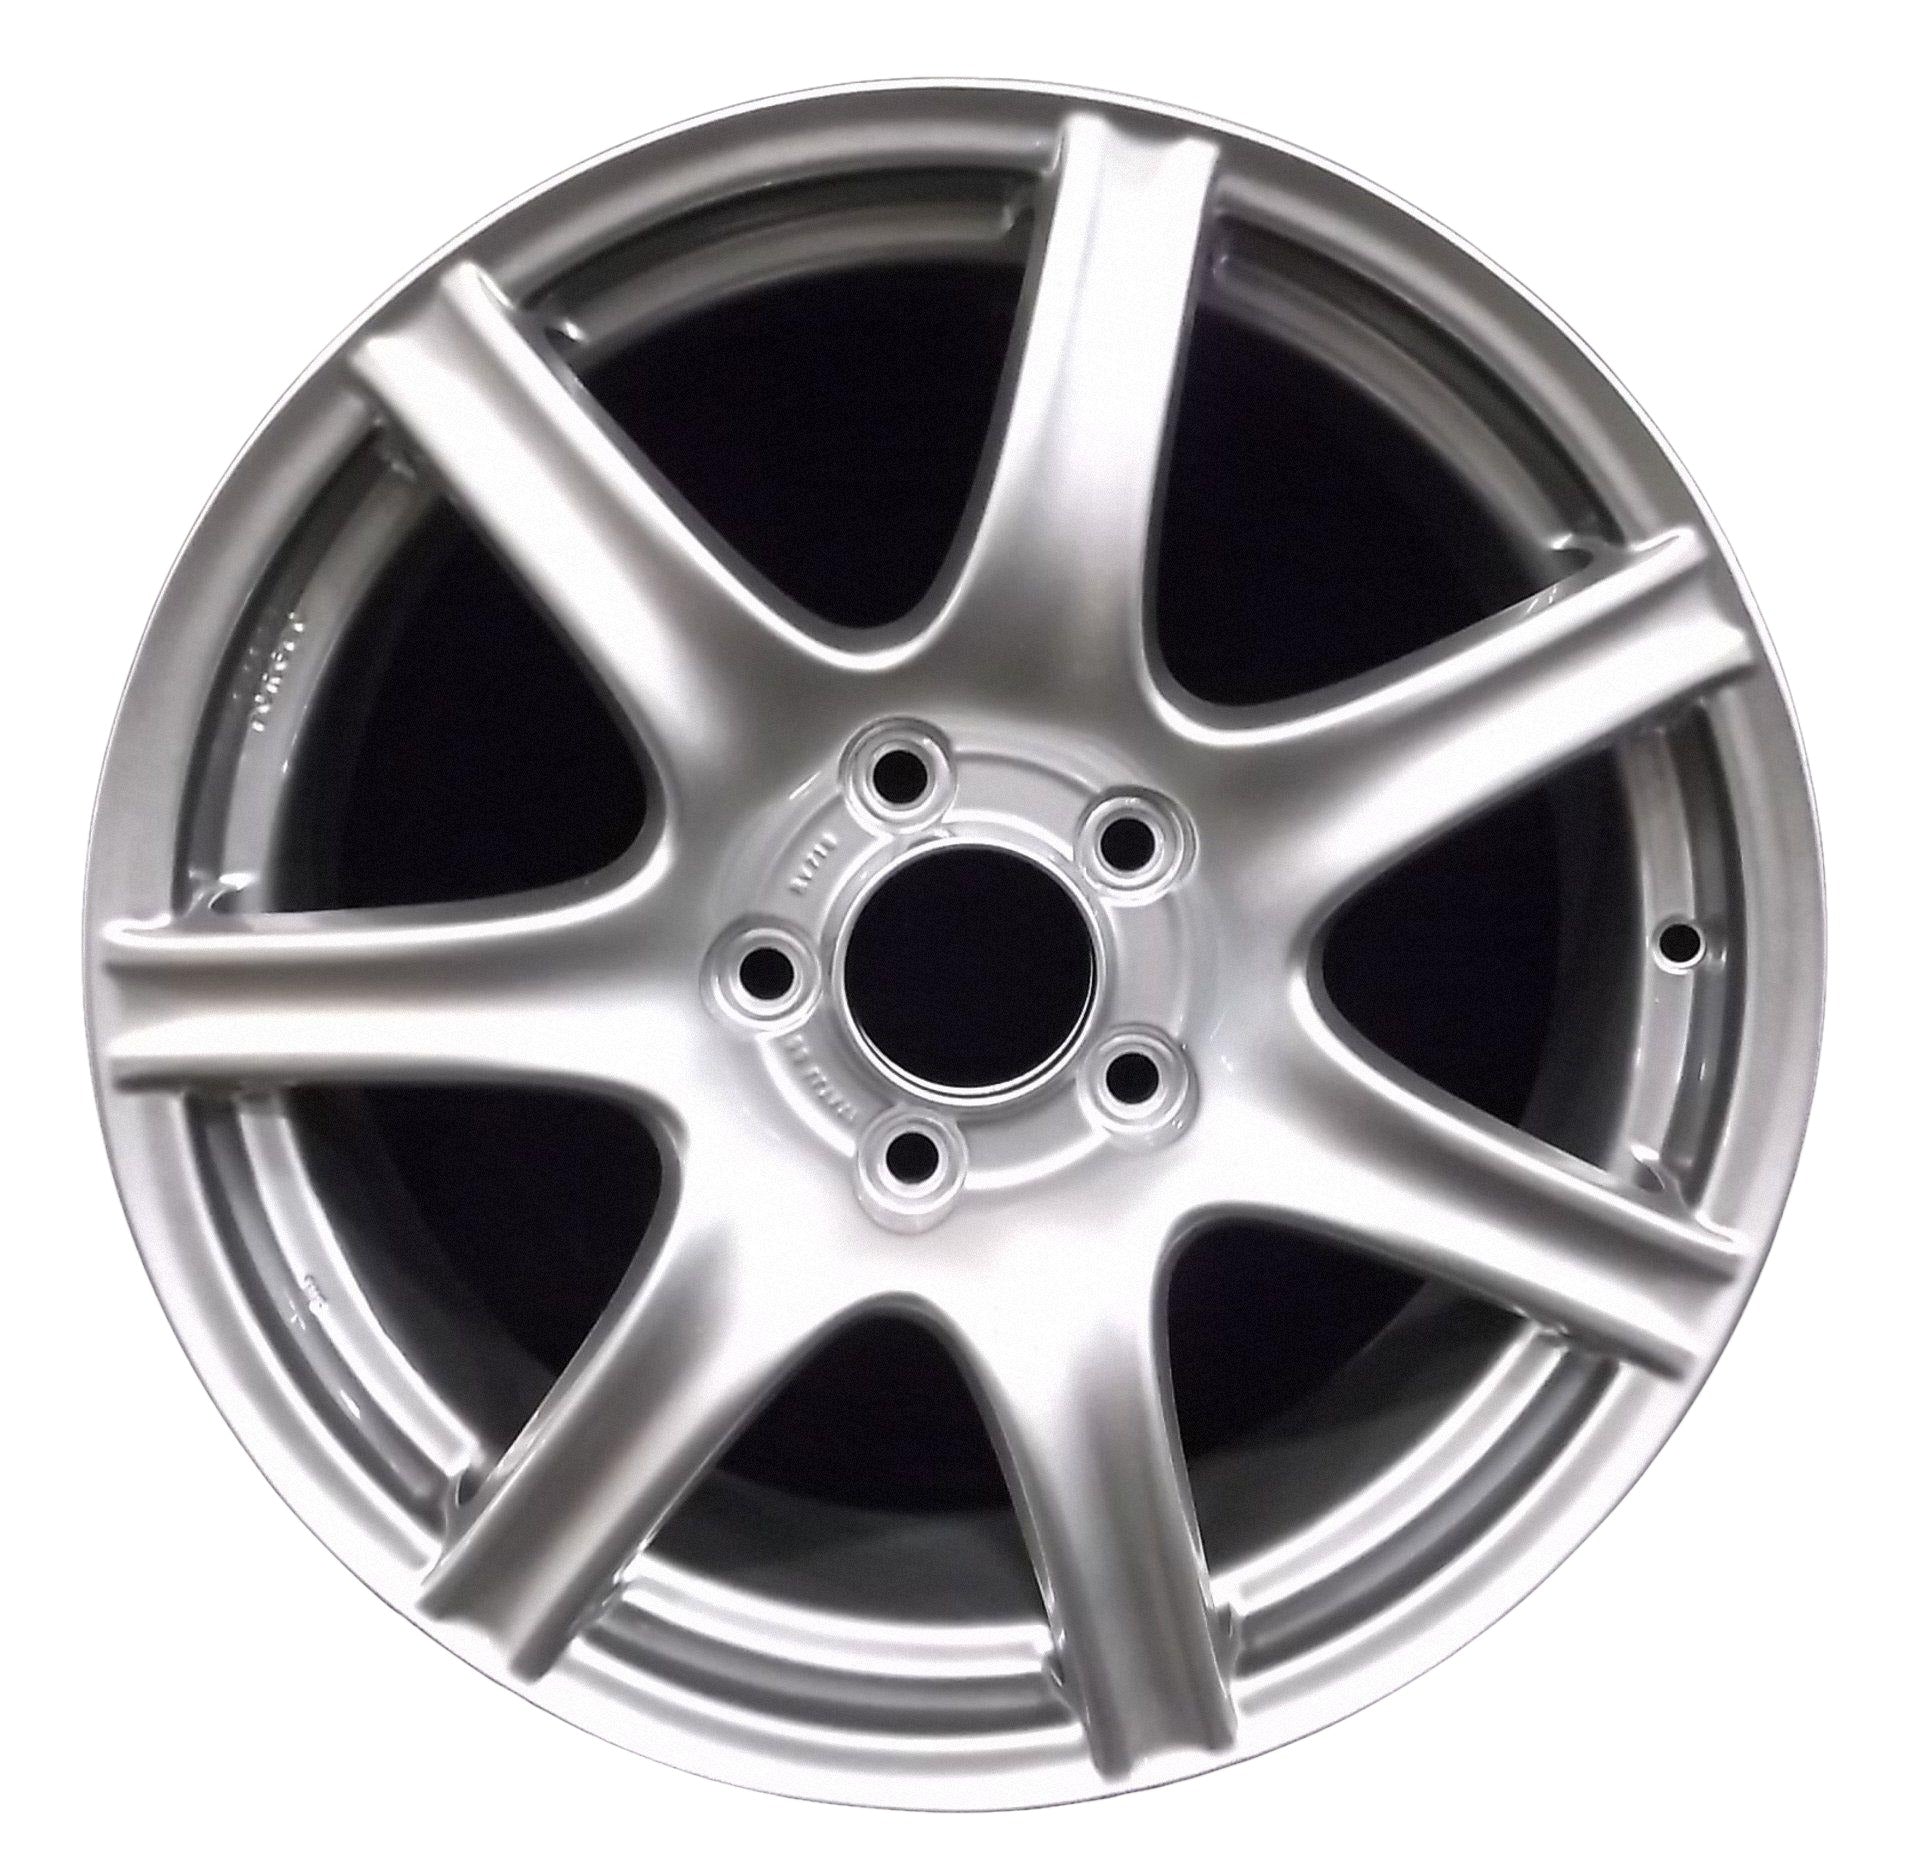 Acura NSX  2002, 2003, 2004, 2005 Factory OEM Car Wheel Size 17x9 Alloy WAO.71724RE.LS09.FF